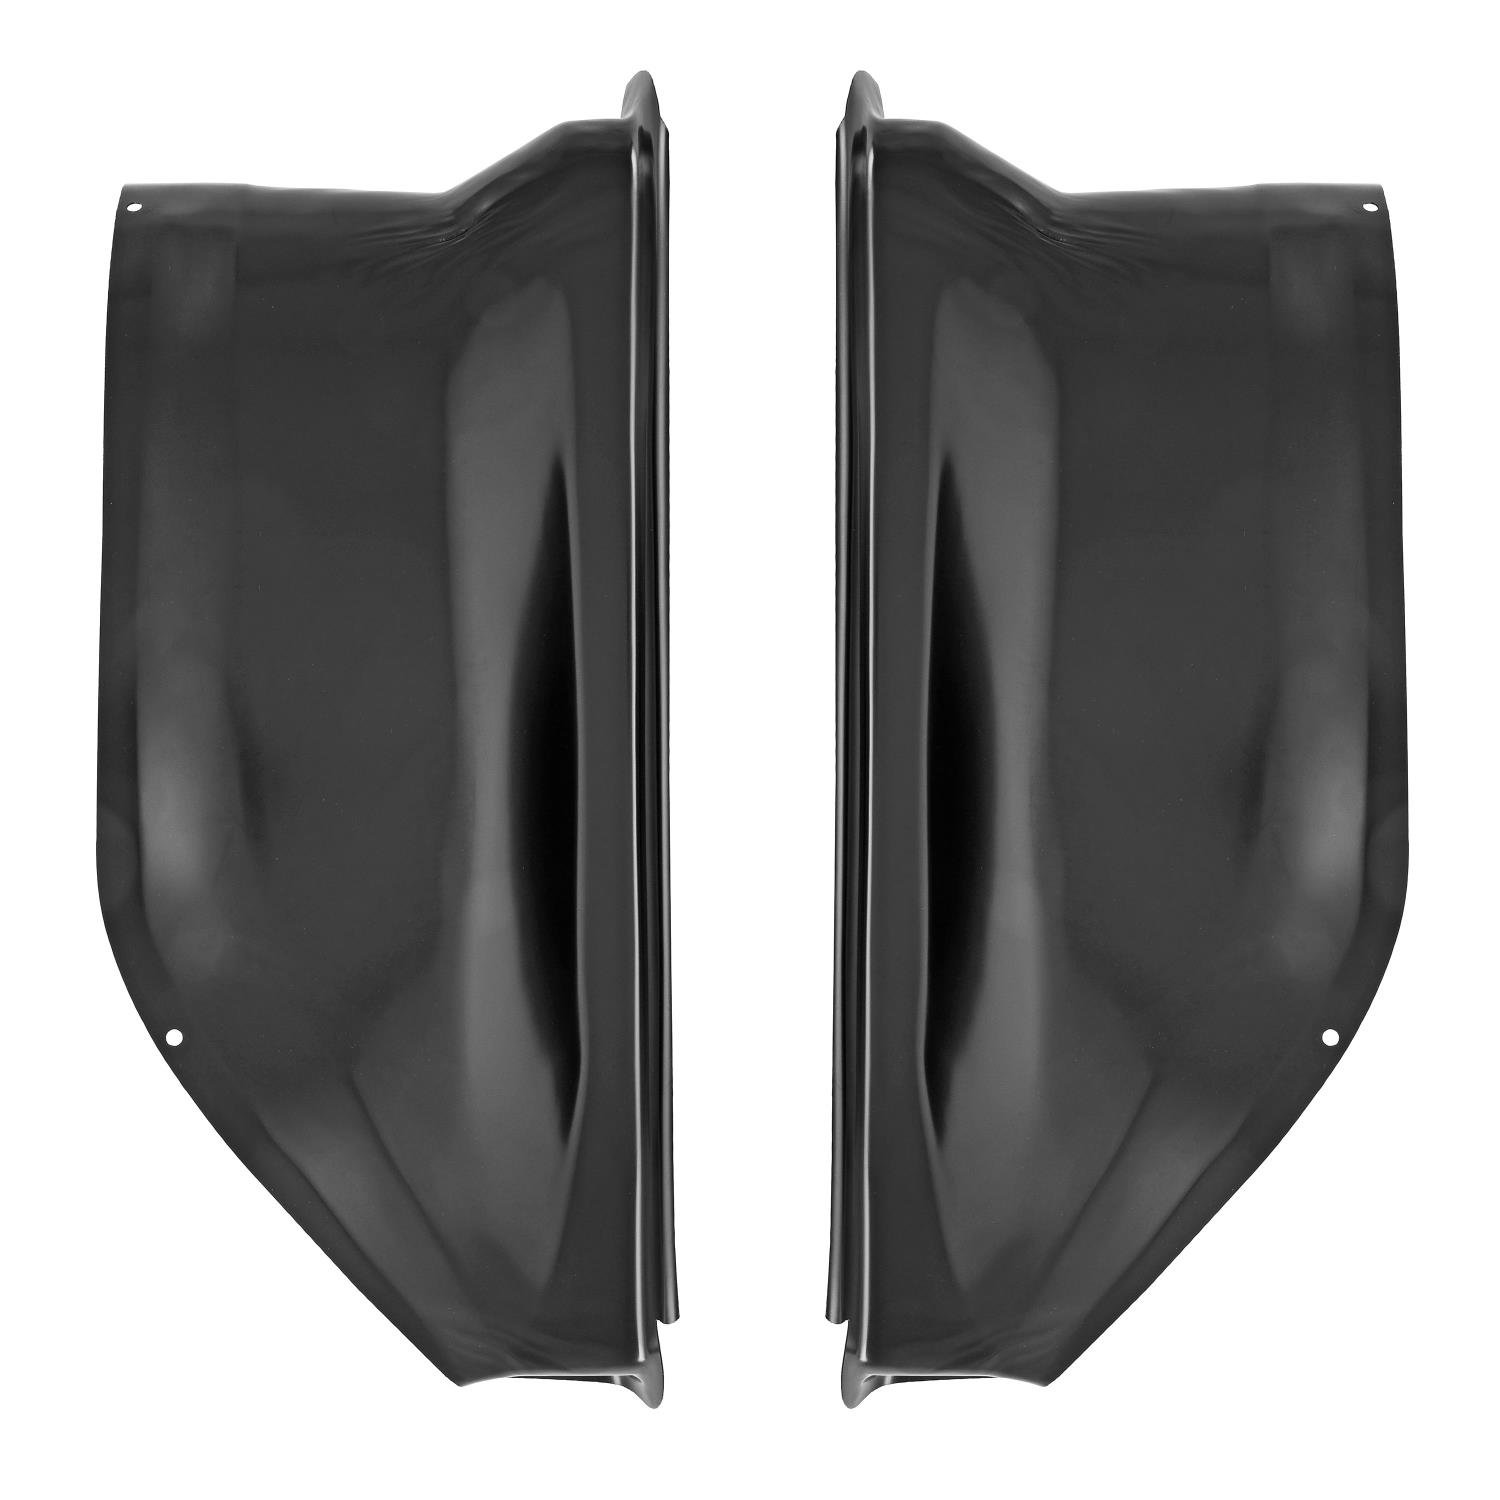 Outer Cowl Panel Kit for Select 1968-1972 Buick, Chevrolet, Oldsmobile and Pontiac Models